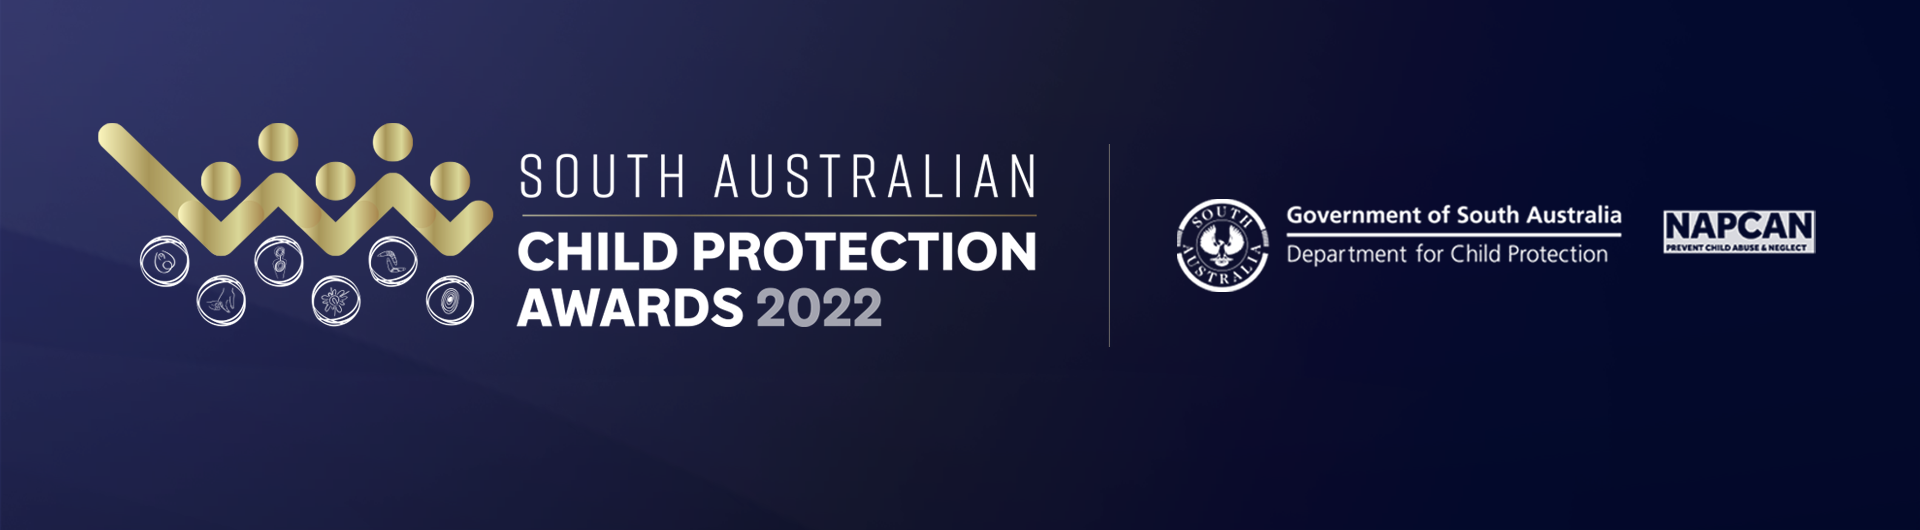 South Australian Child Protection Awards